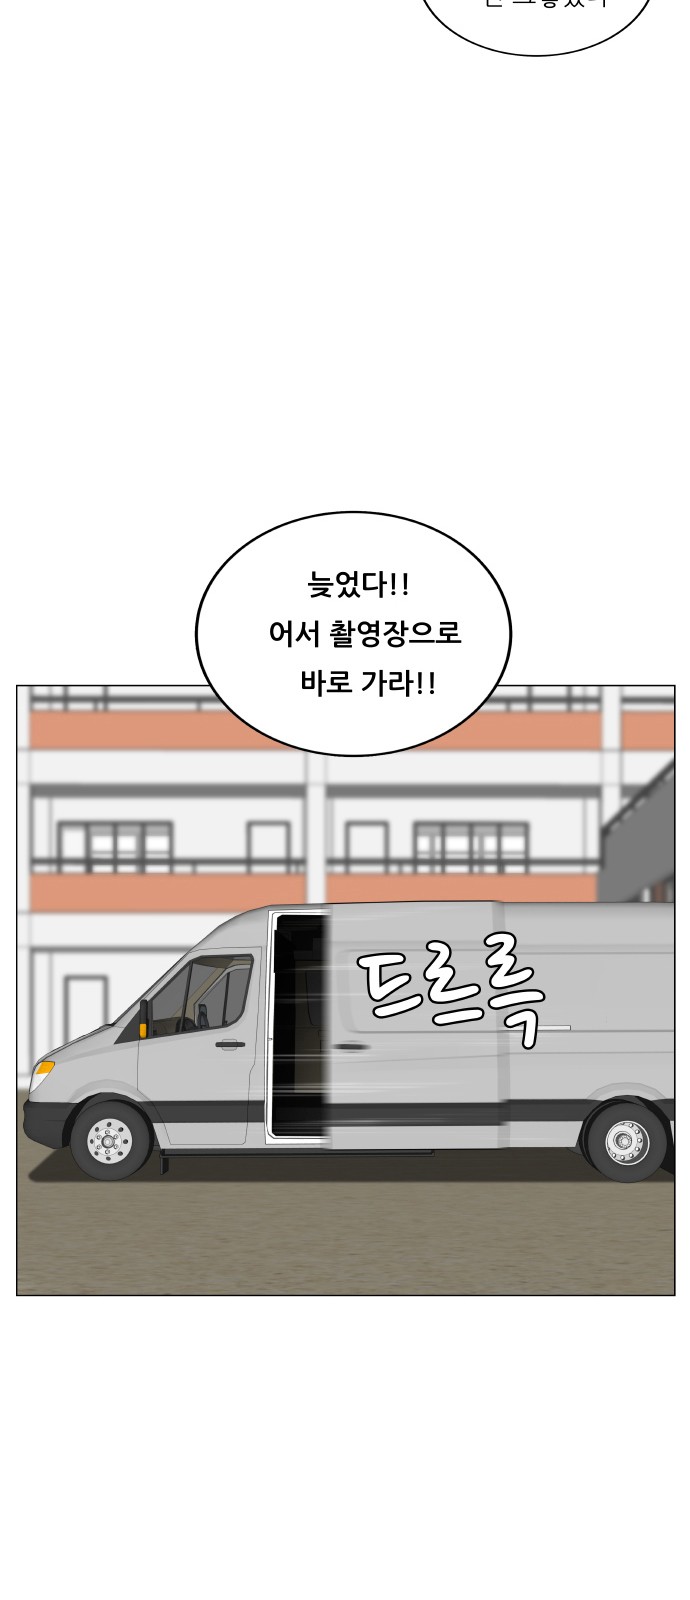 Ultimate Legend - Kang Hae Hyo - Chapter 470 - Page 2